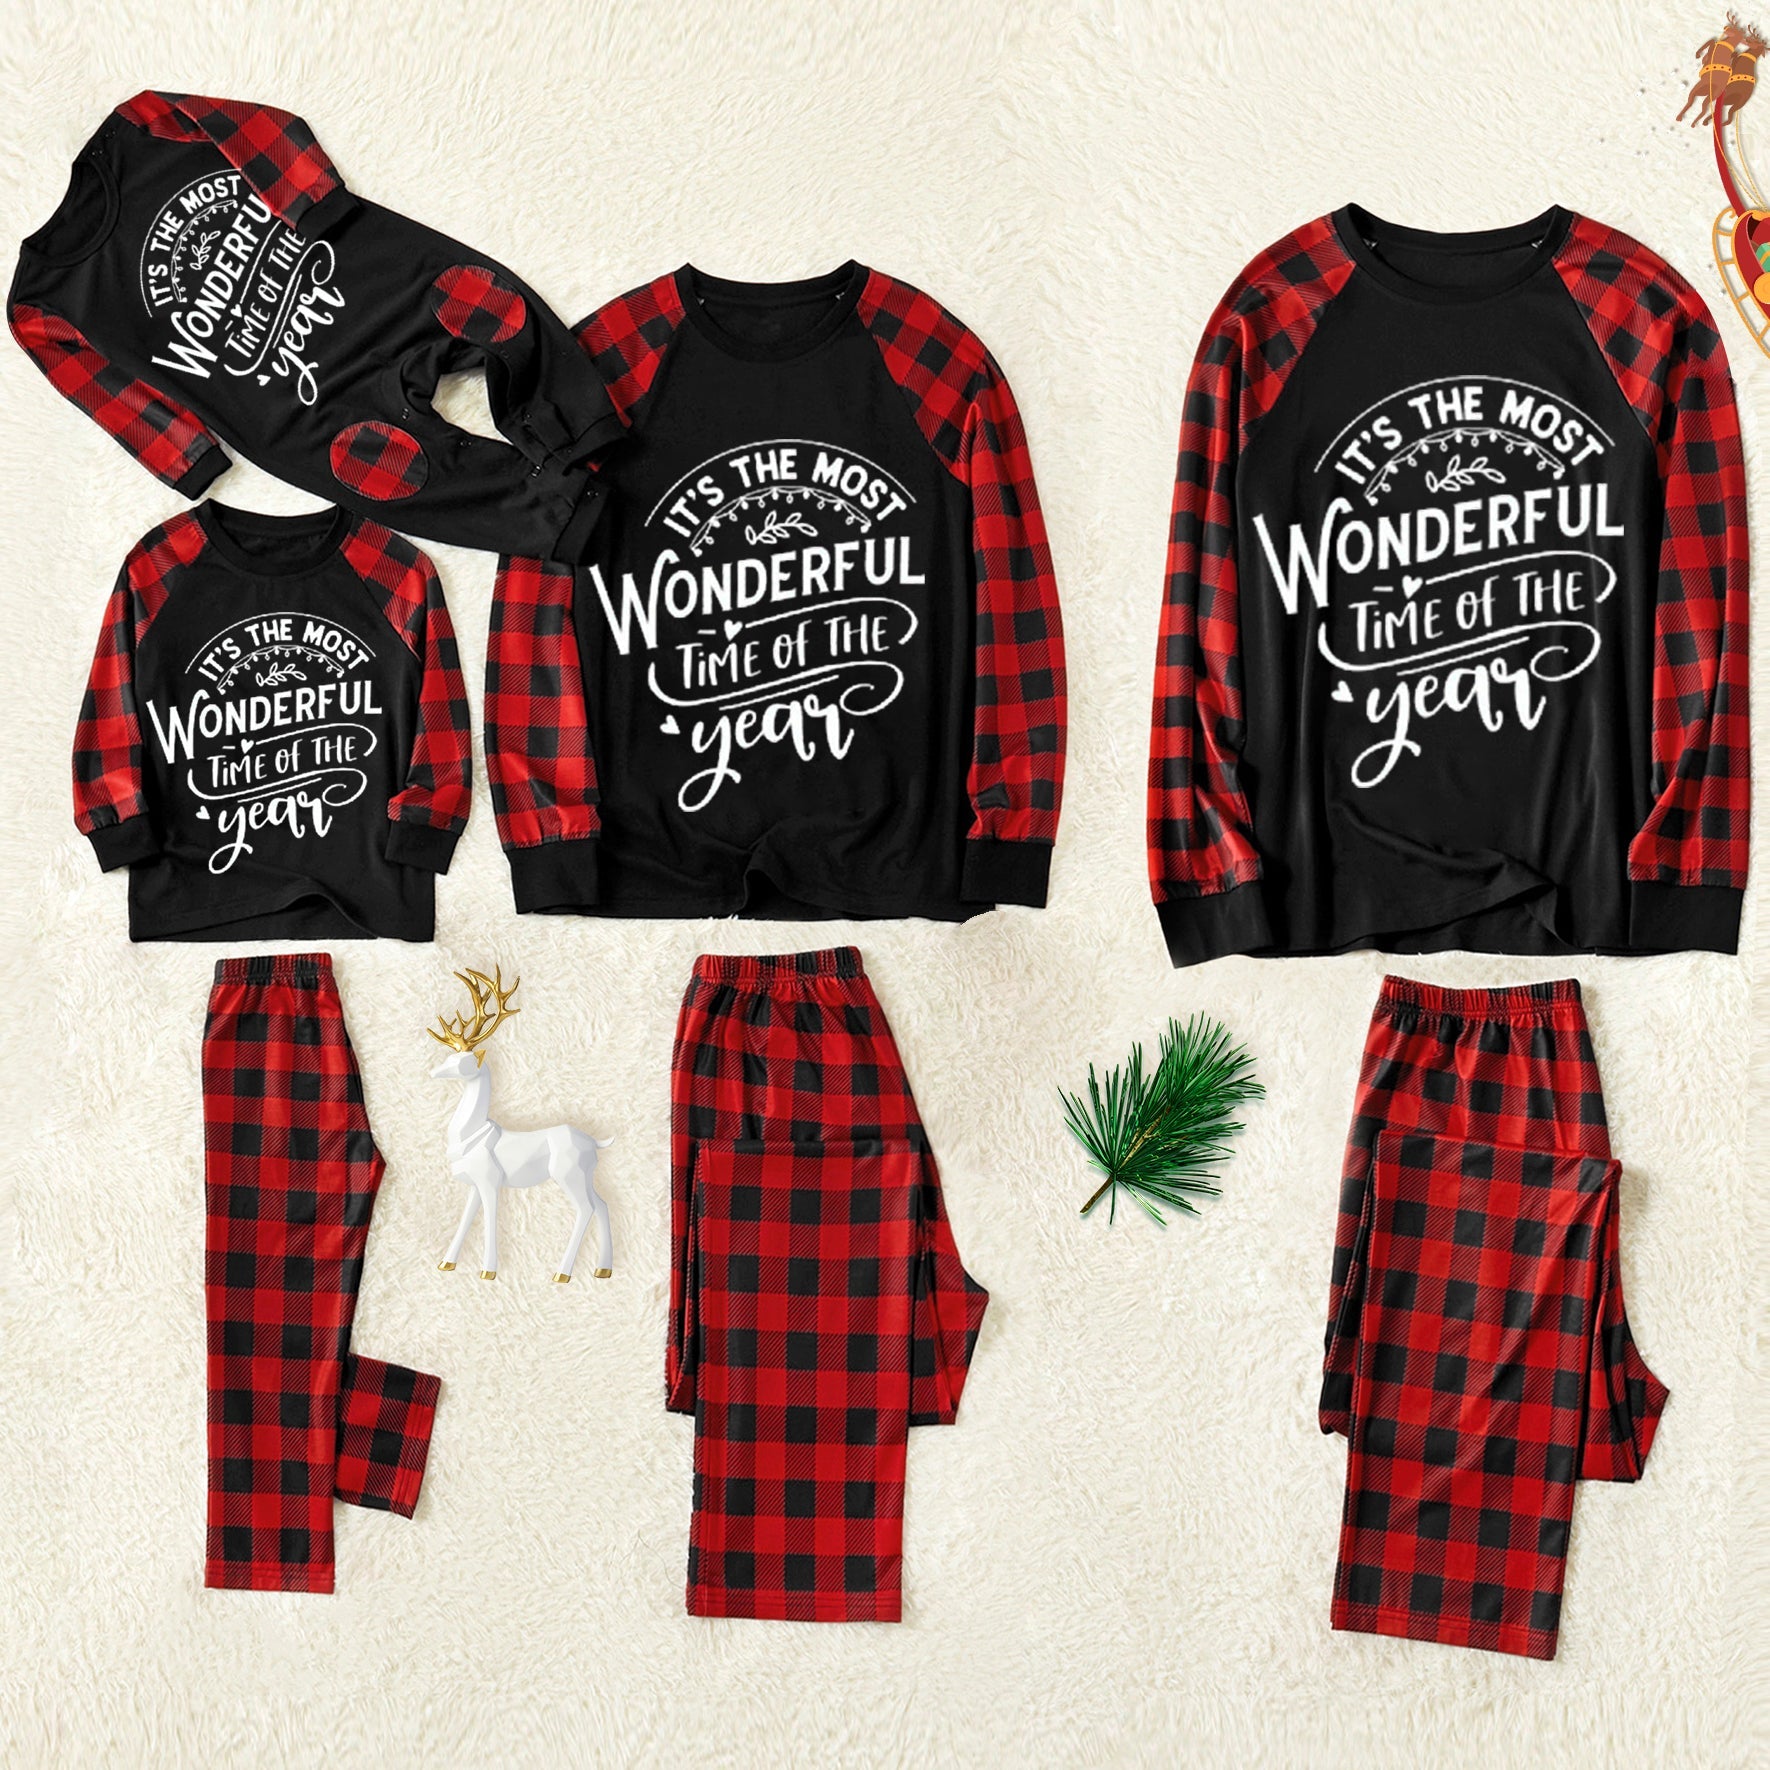 Christmas ‘It's The Most Woderful Time of The Year“ Letter Print Patterned Contrast Black top and Black & Red Plaid Pants Family Matching Pajamas Set